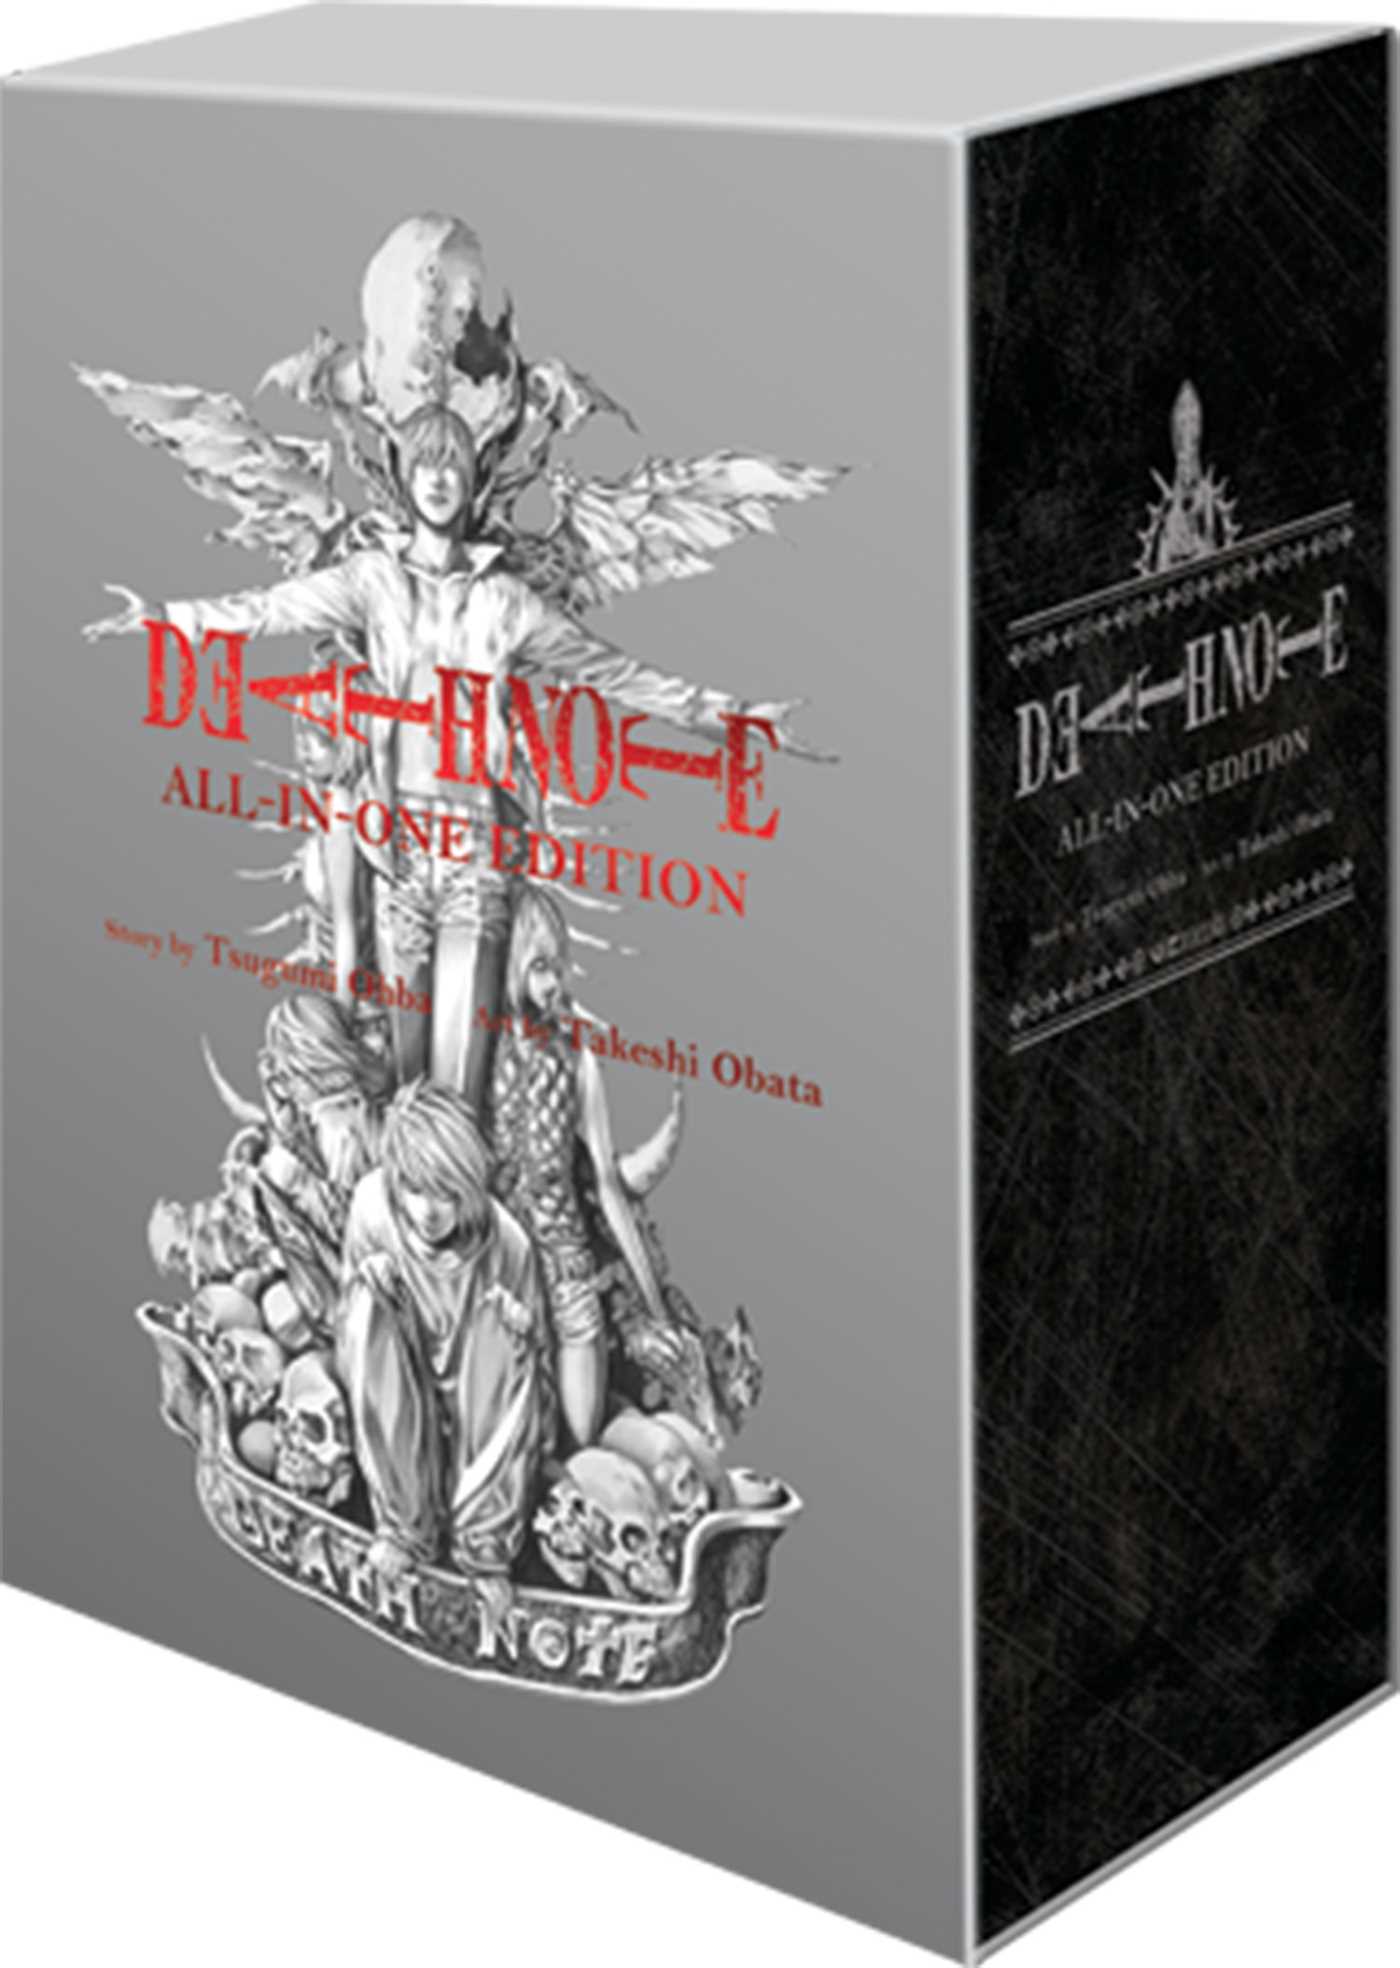 DEATH NOTE - ALL IN ONE EDITION – J-Store Online